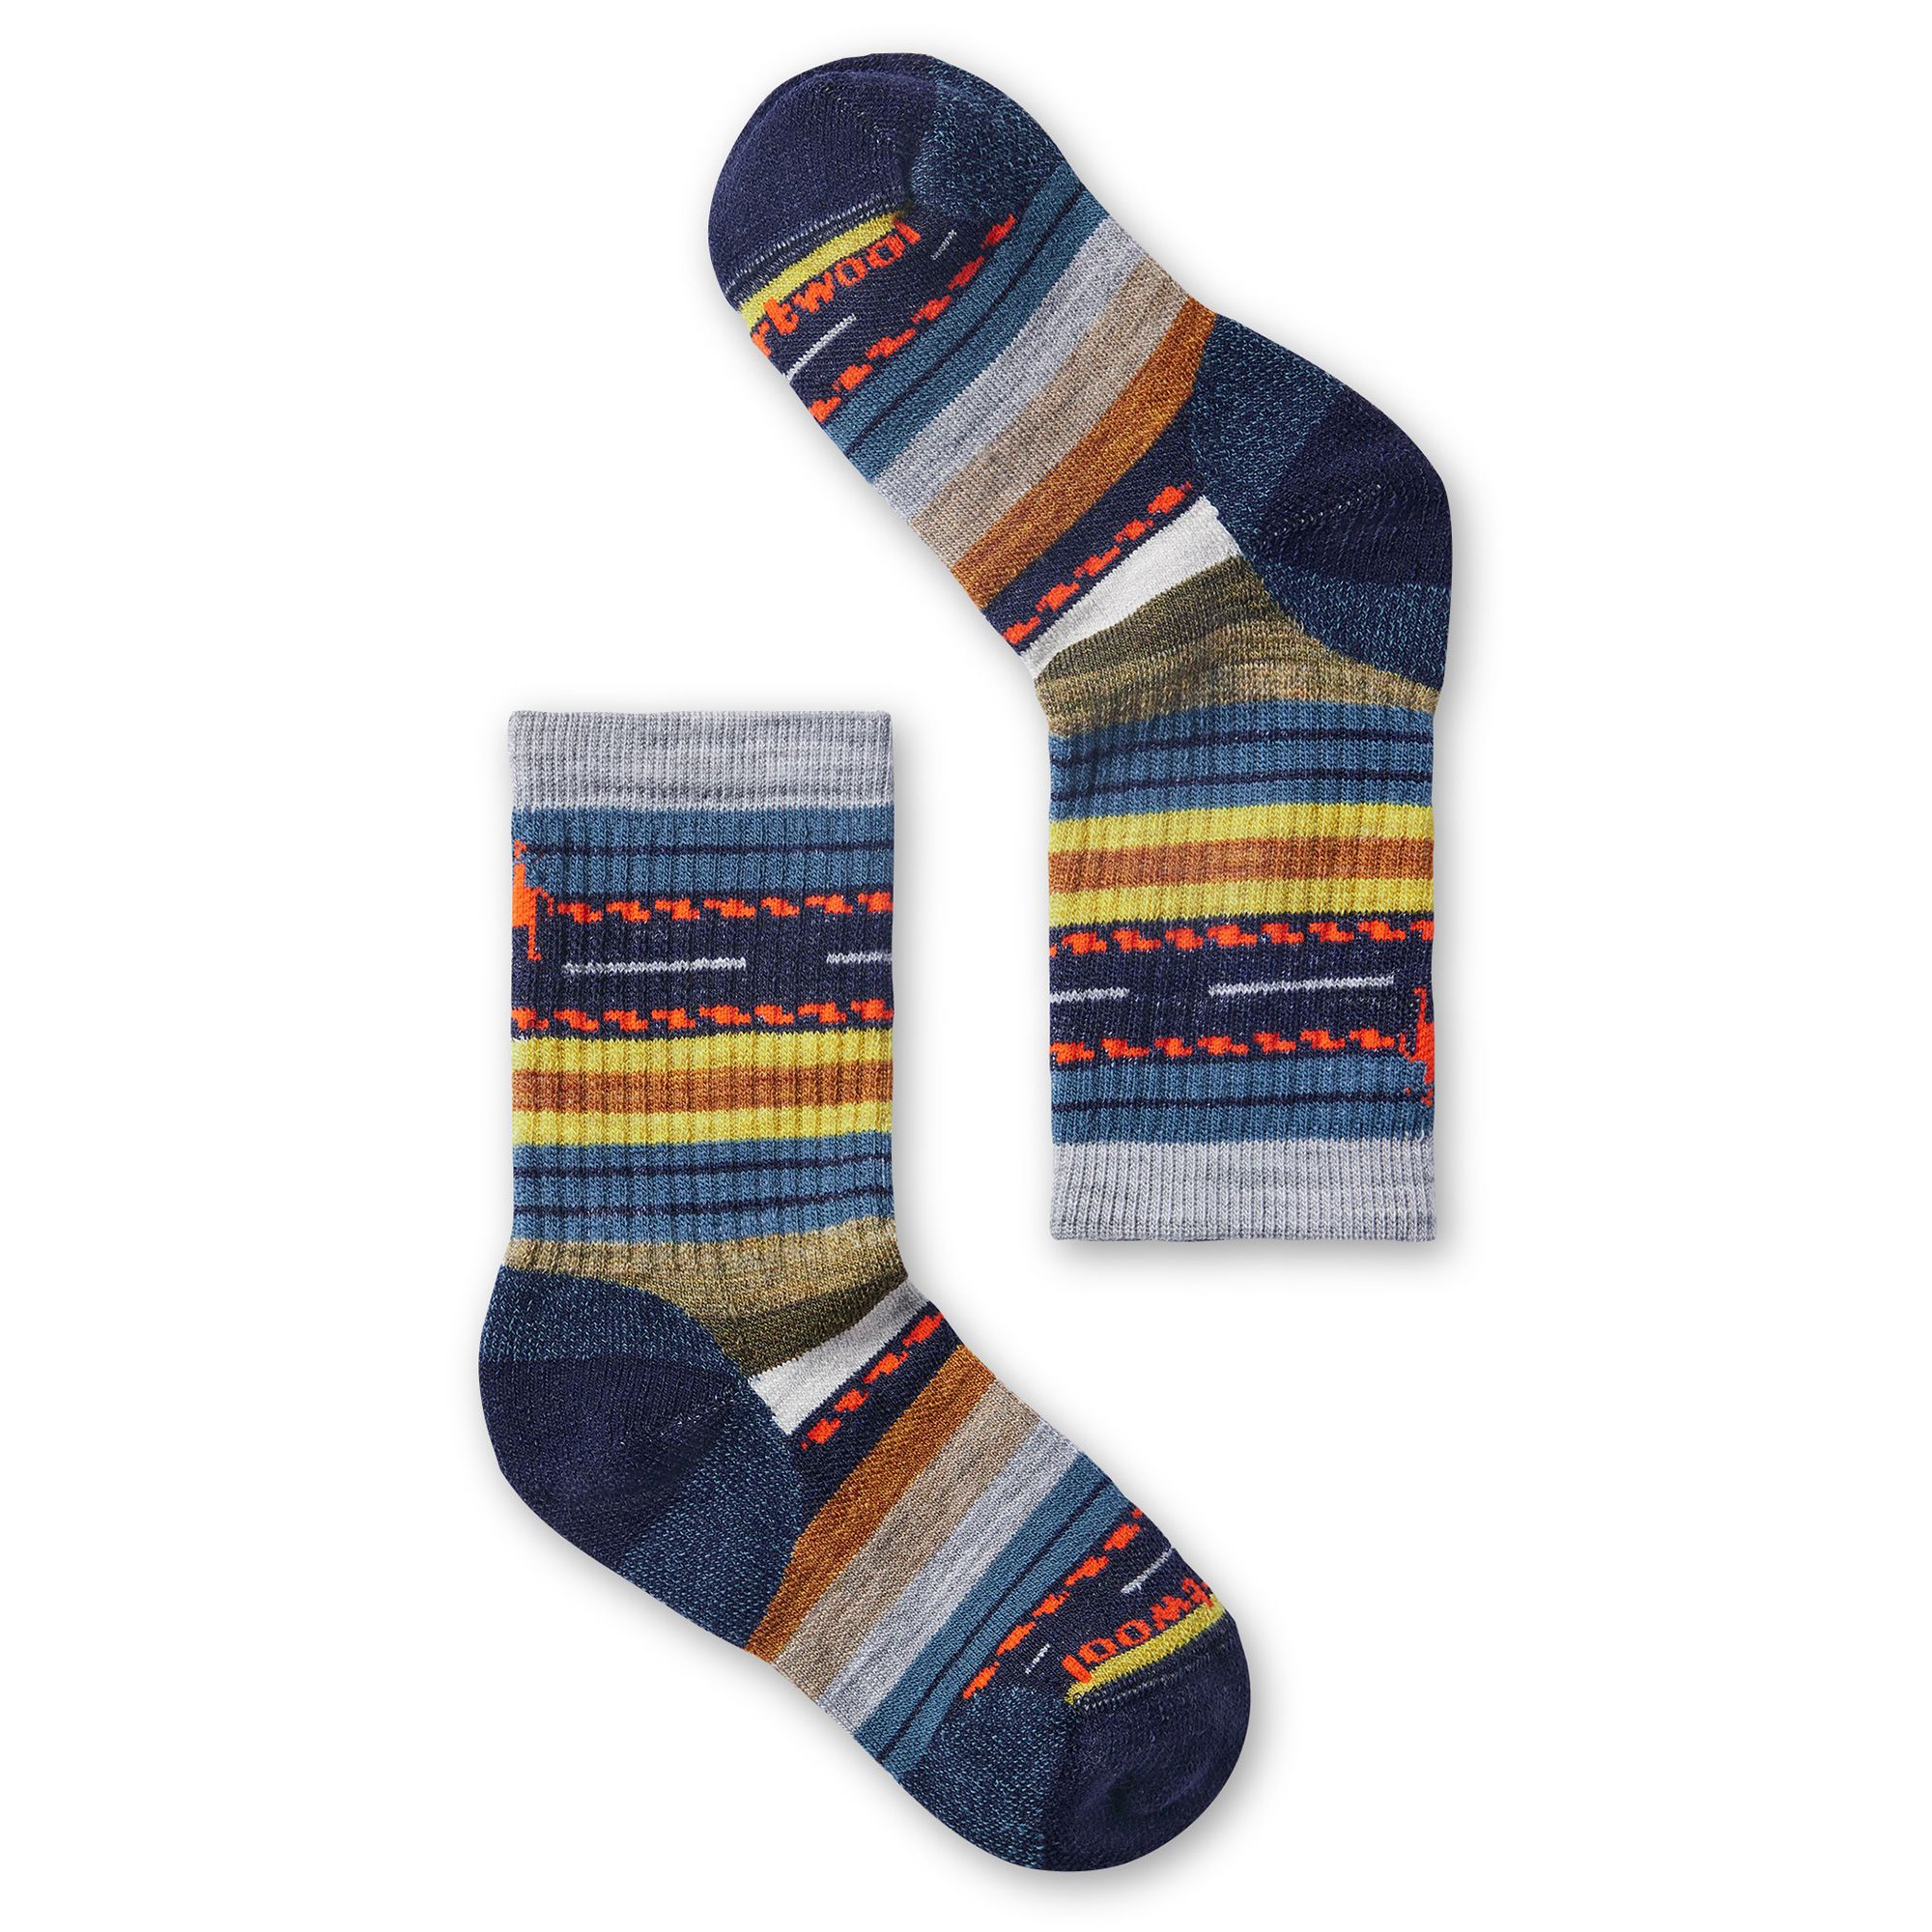 Smartwool hiking socks. The one on the left was purchased in 1999, totally  worth $25 per pair. : r/BuyItForLife